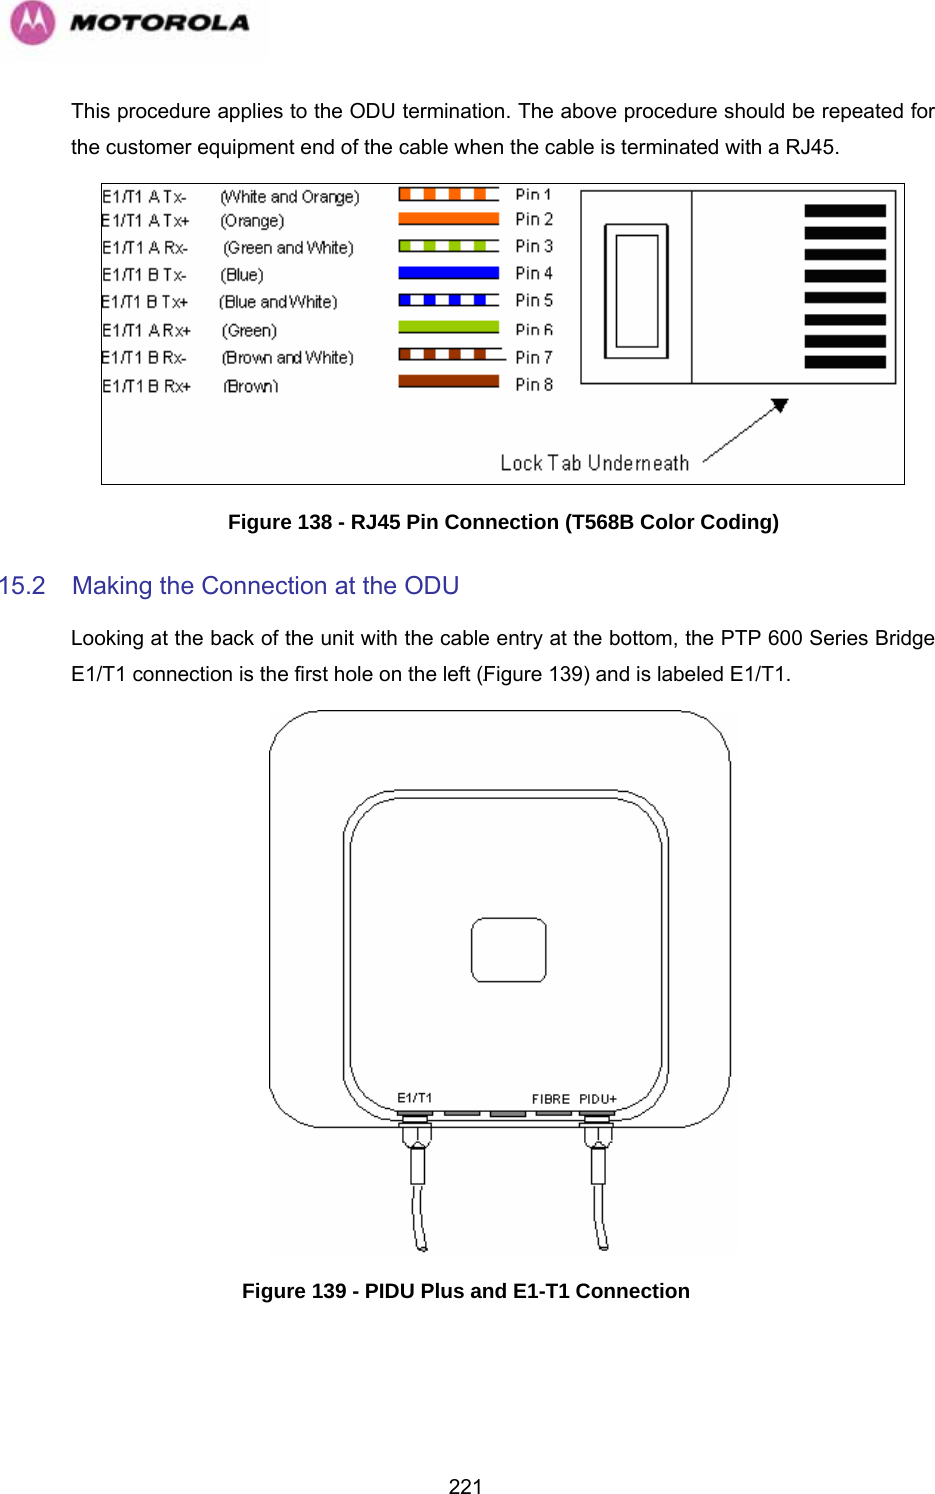   221This procedure applies to the ODU termination. The above procedure should be repeated for the customer equipment end of the cable when the cable is terminated with a RJ45.  Figure 138 - RJ45 Pin Connection (T568B Color Coding) 15.2  Making the Connection at the ODU Looking at the back of the unit with the cable entry at the bottom, the PTP 600 Series Bridge E1/T1 connection is the first hole on the left (1233HFigure 139) and is labeled E1/T1.  Figure 139 - PIDU Plus and E1-T1 Connection 